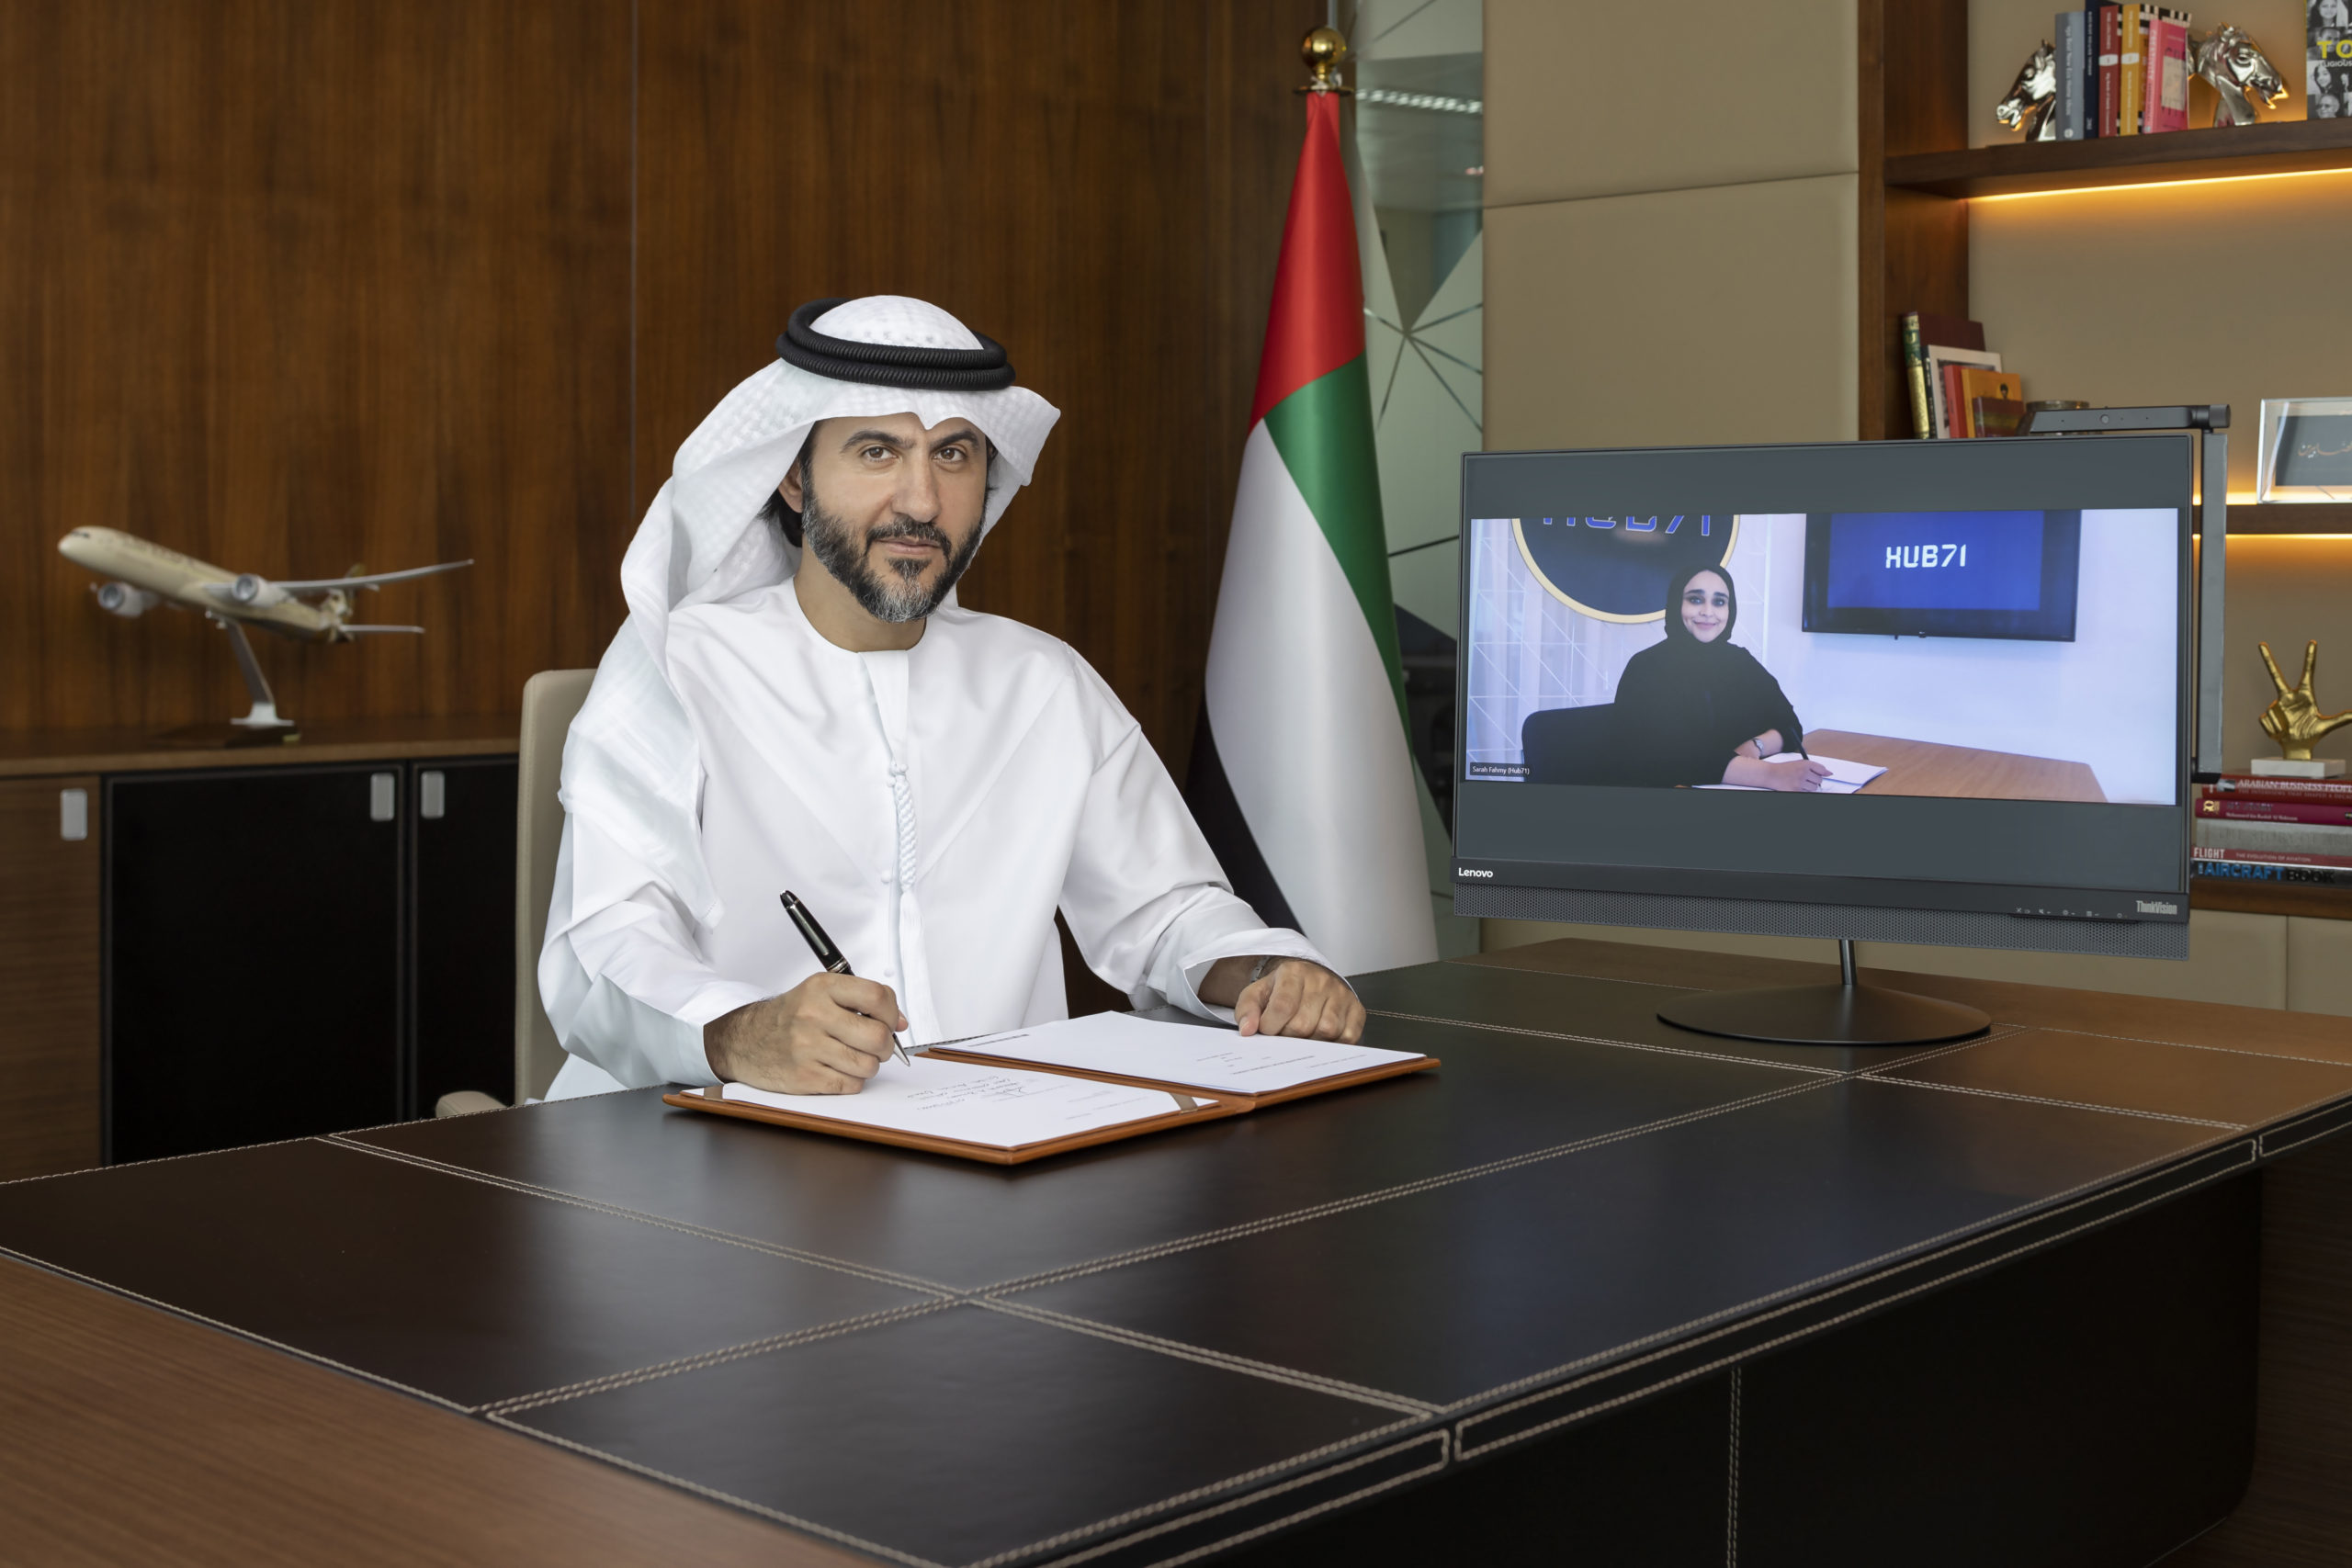 Image for Etihad Airways And Hub71 Sign MOU To Boost Global Tech Ecosystem In Abu Dhabi